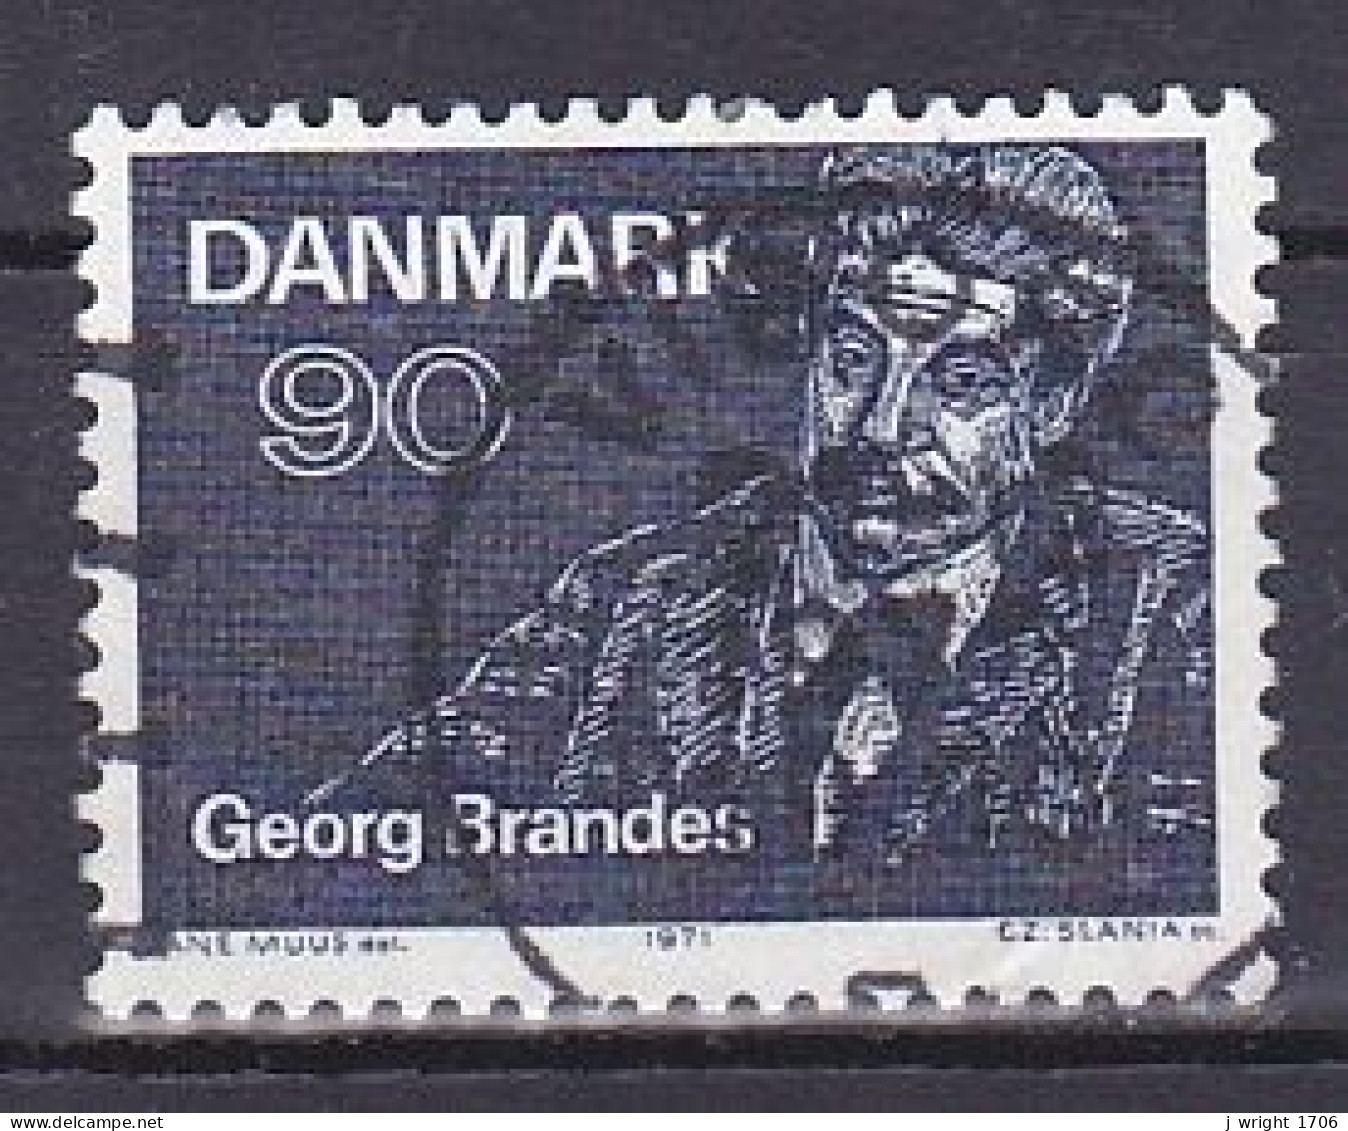 Denmark, 1971, Georg Brandes First Lectures Centenary, 90ø, USED - Oblitérés